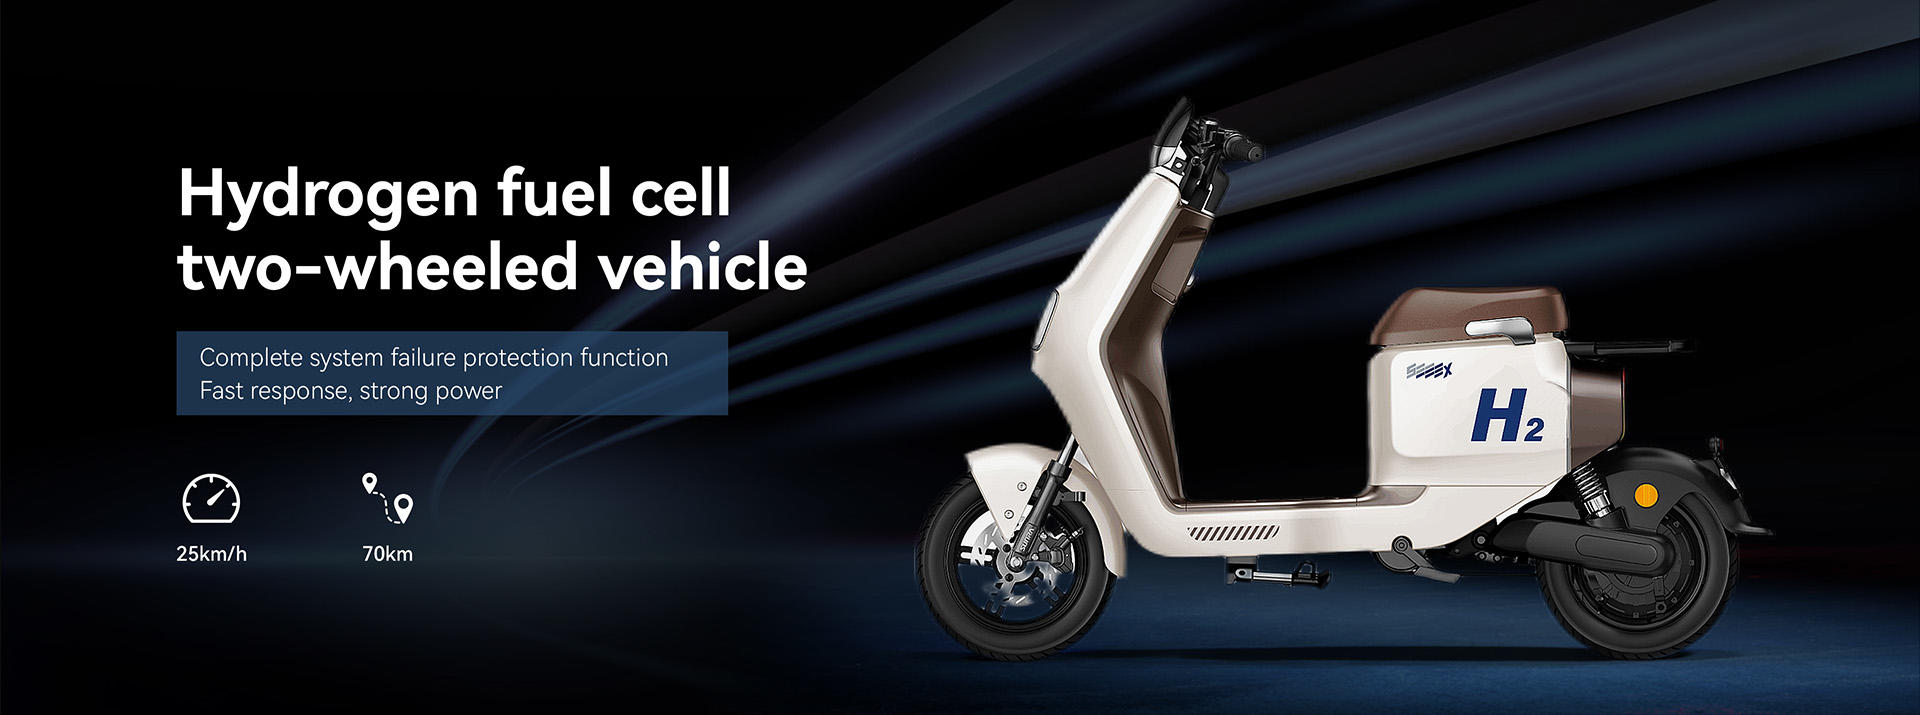 Hydrogen fuel cell two-wheeled vehicle